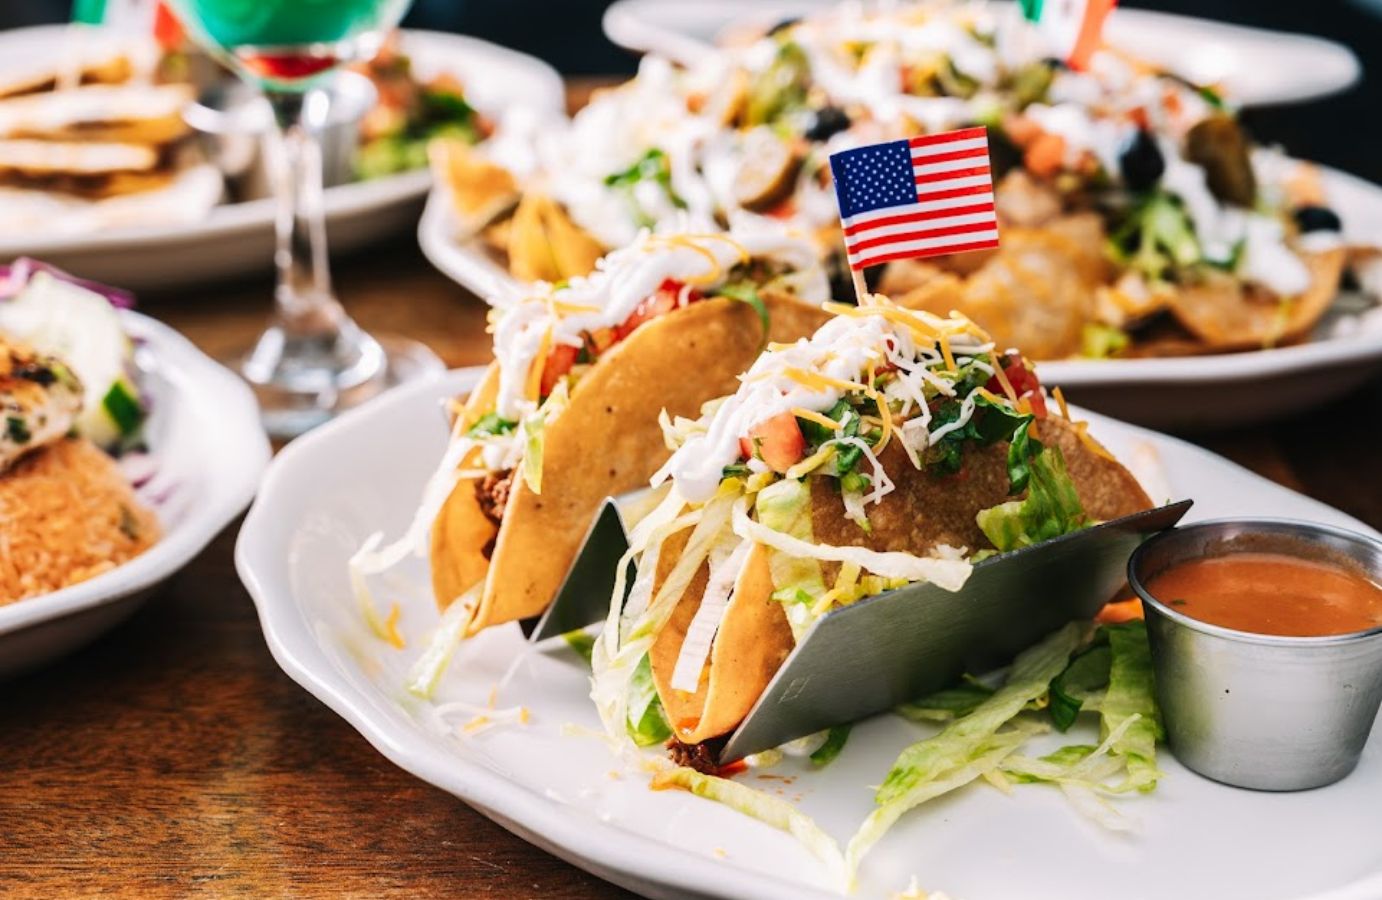 Closeup of a plate of tacos with a small American flag